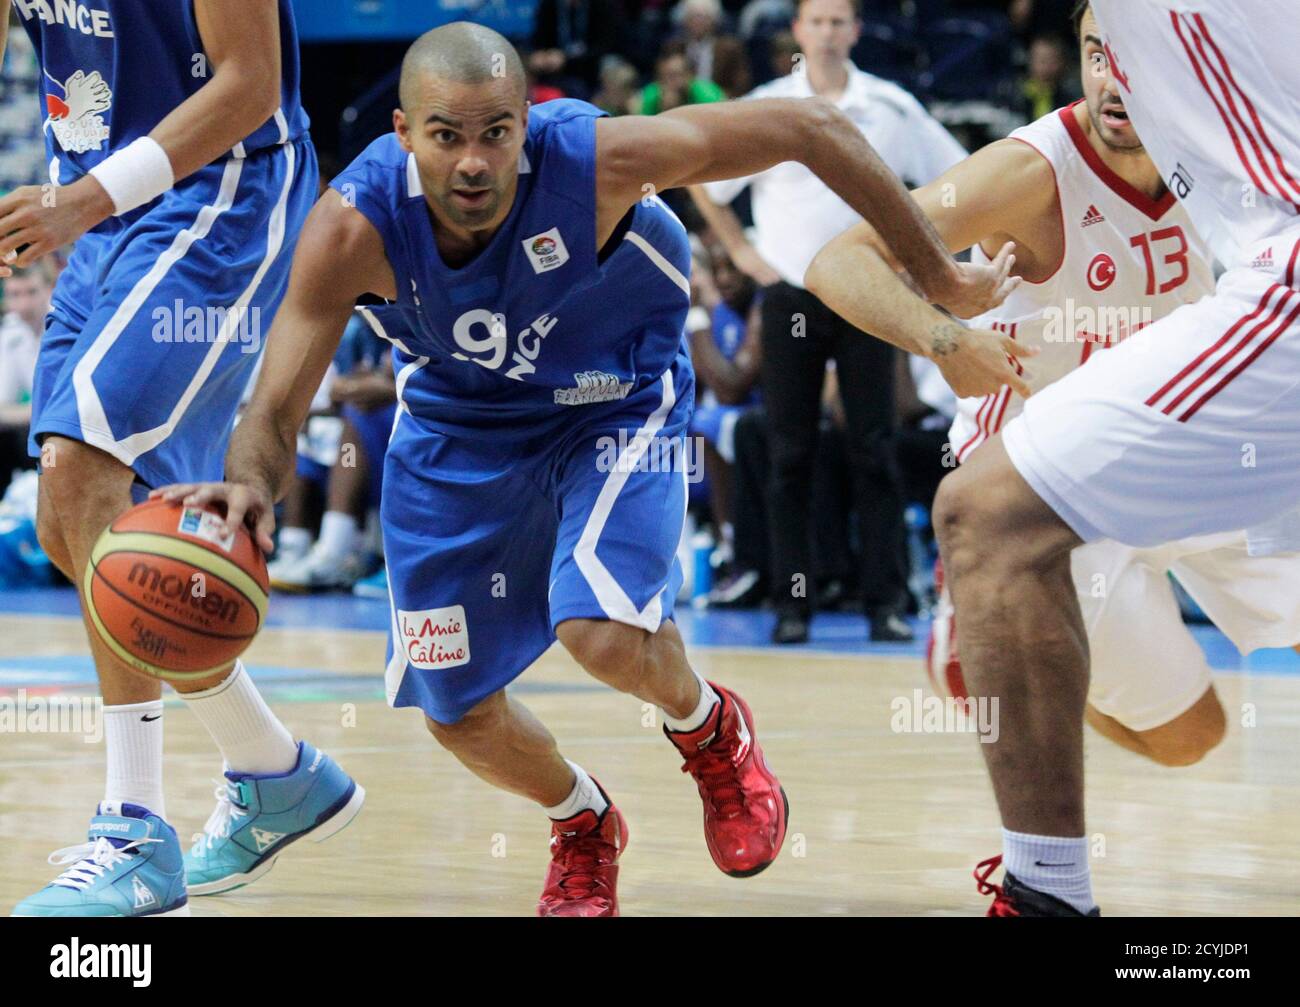 Tony Parker of France (L) drives past Ender Arslan of Turkey (13) during their FIBA EuroBasket 2011 Group E basketball game in Vilnius September 7, 2011.    REUTERS/Ints Kalnins (LITHUANIA - Tags: SPORT BASKETBALL) Stock Photo